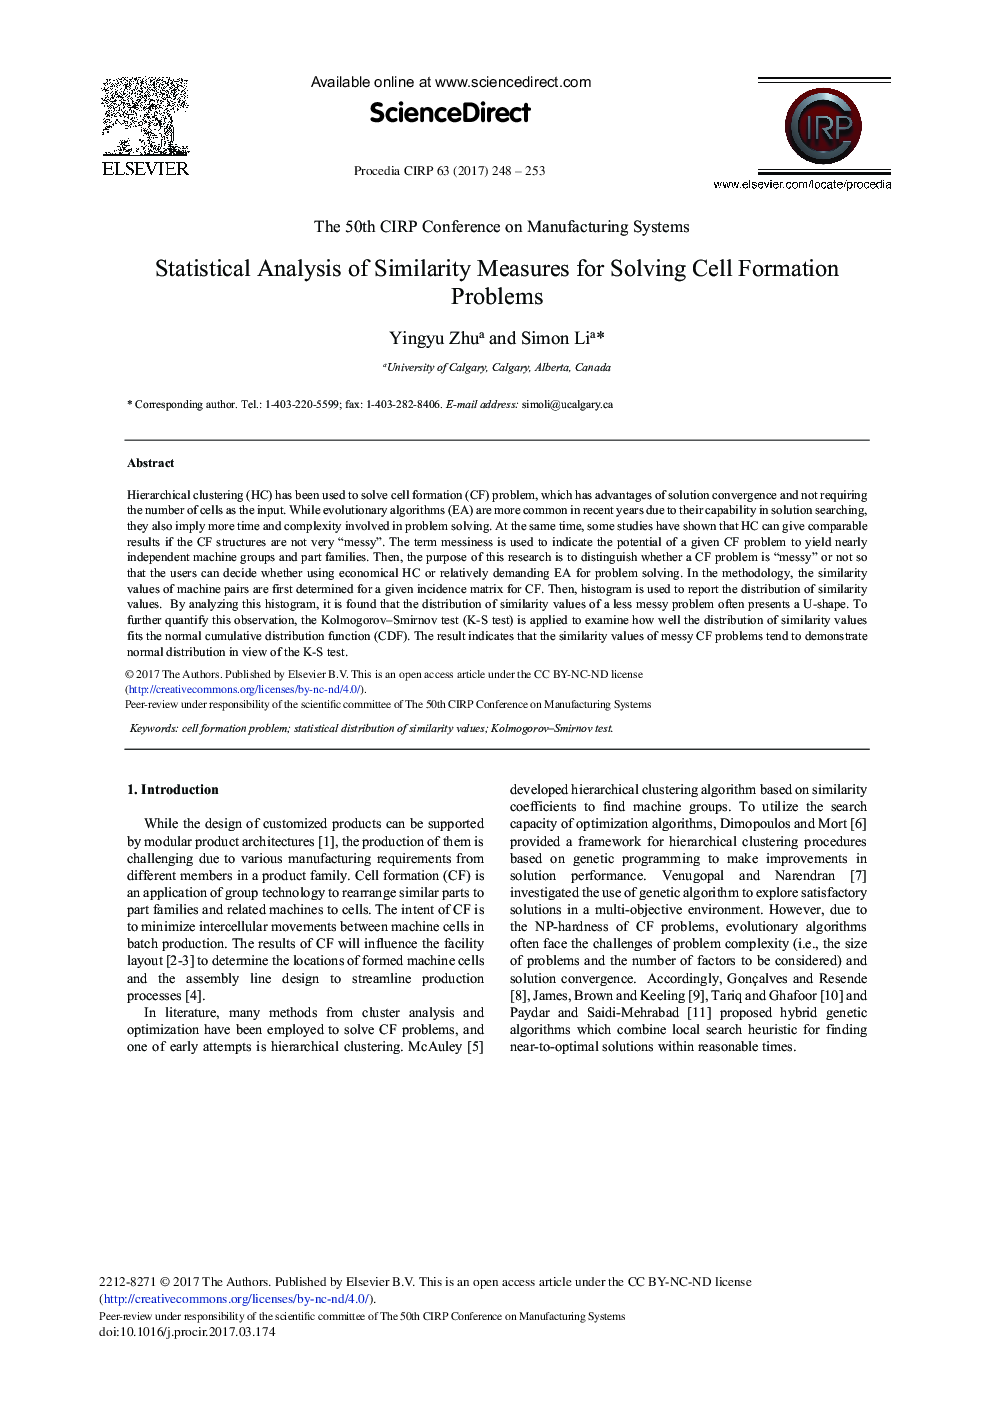 Statistical Analysis of Similarity Measures for Solving Cell Formation Problems